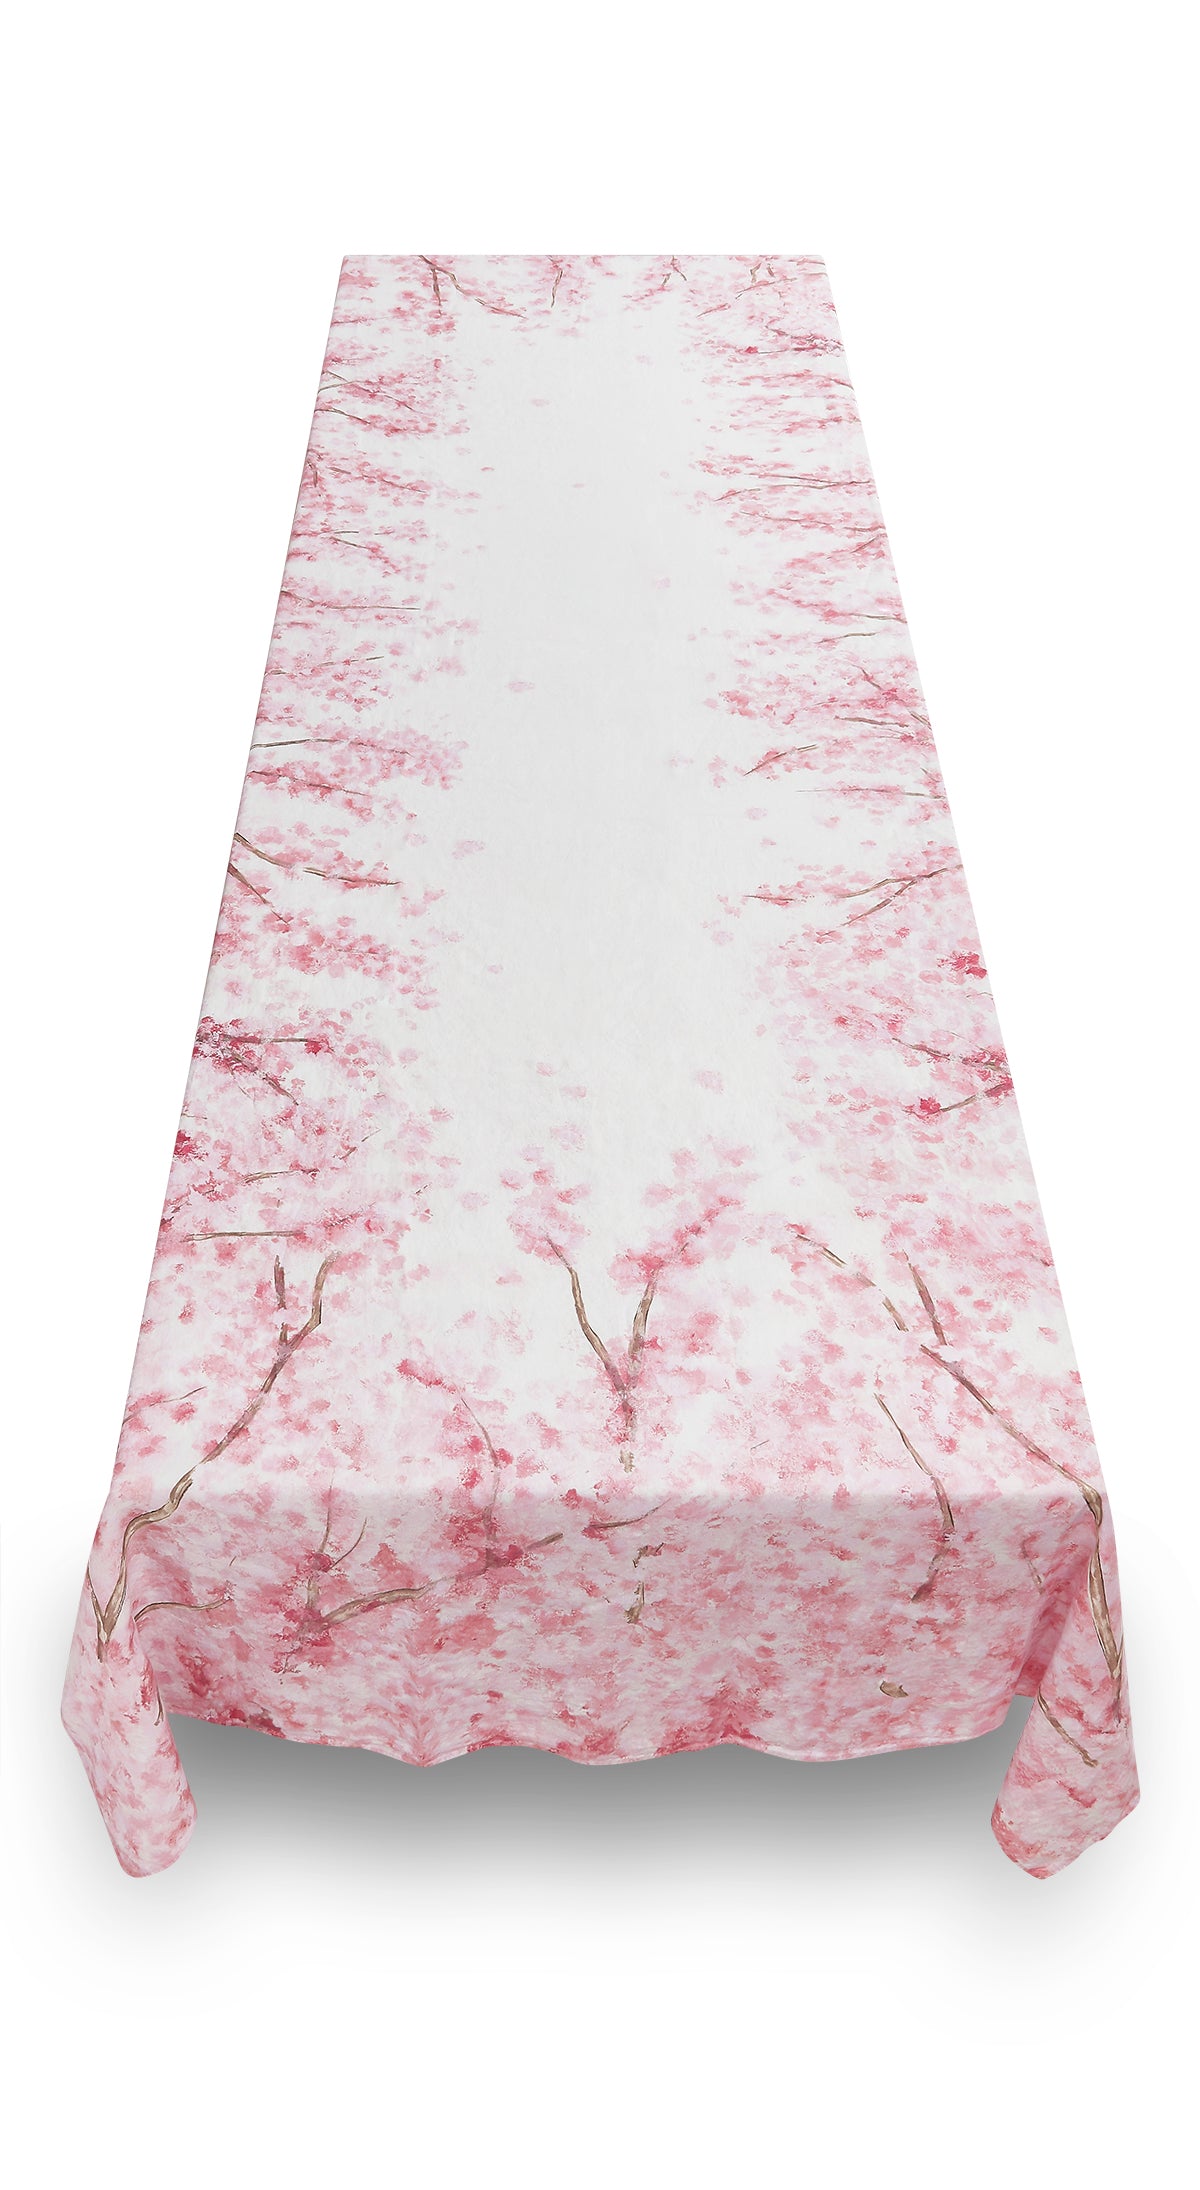 Blossom Linen Tablecloth in White & Pink